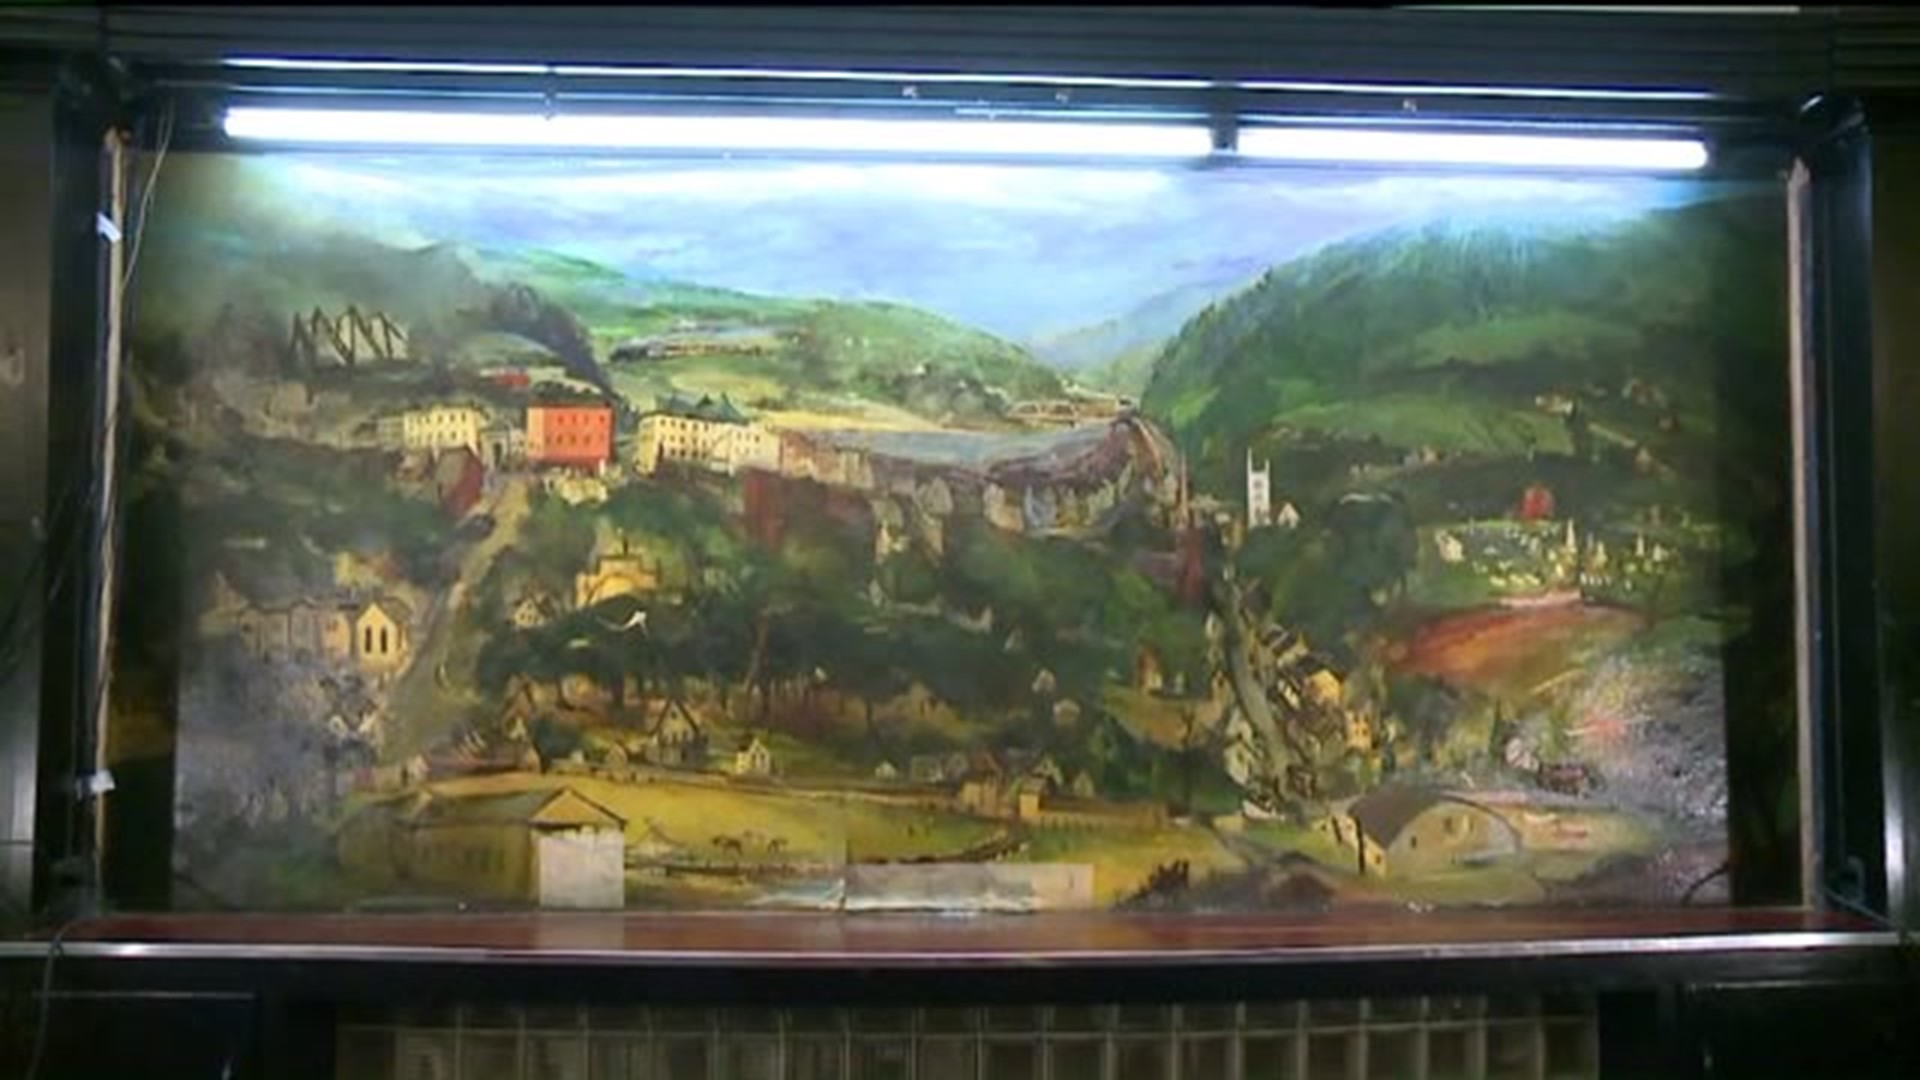 Famous Mural Being Moved from Carbon County